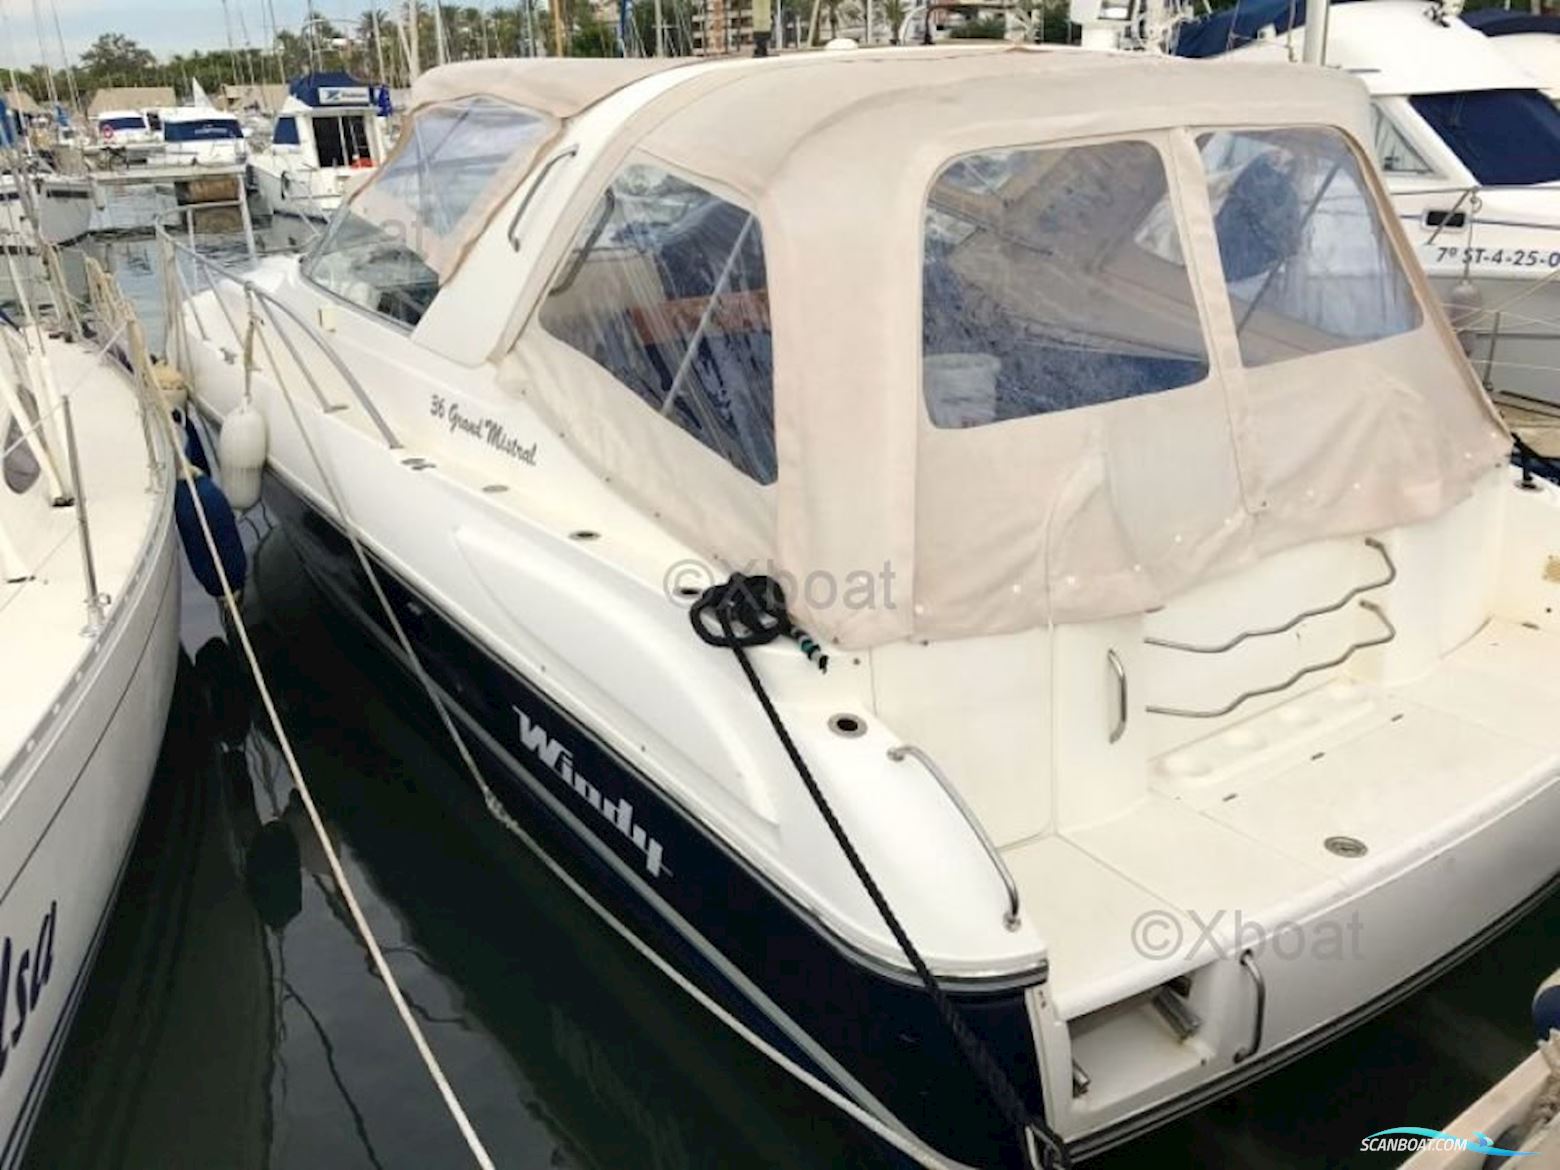 Windy 36 Grand Mistral Motor boat 1996, with Volvo Penta engine, Spain